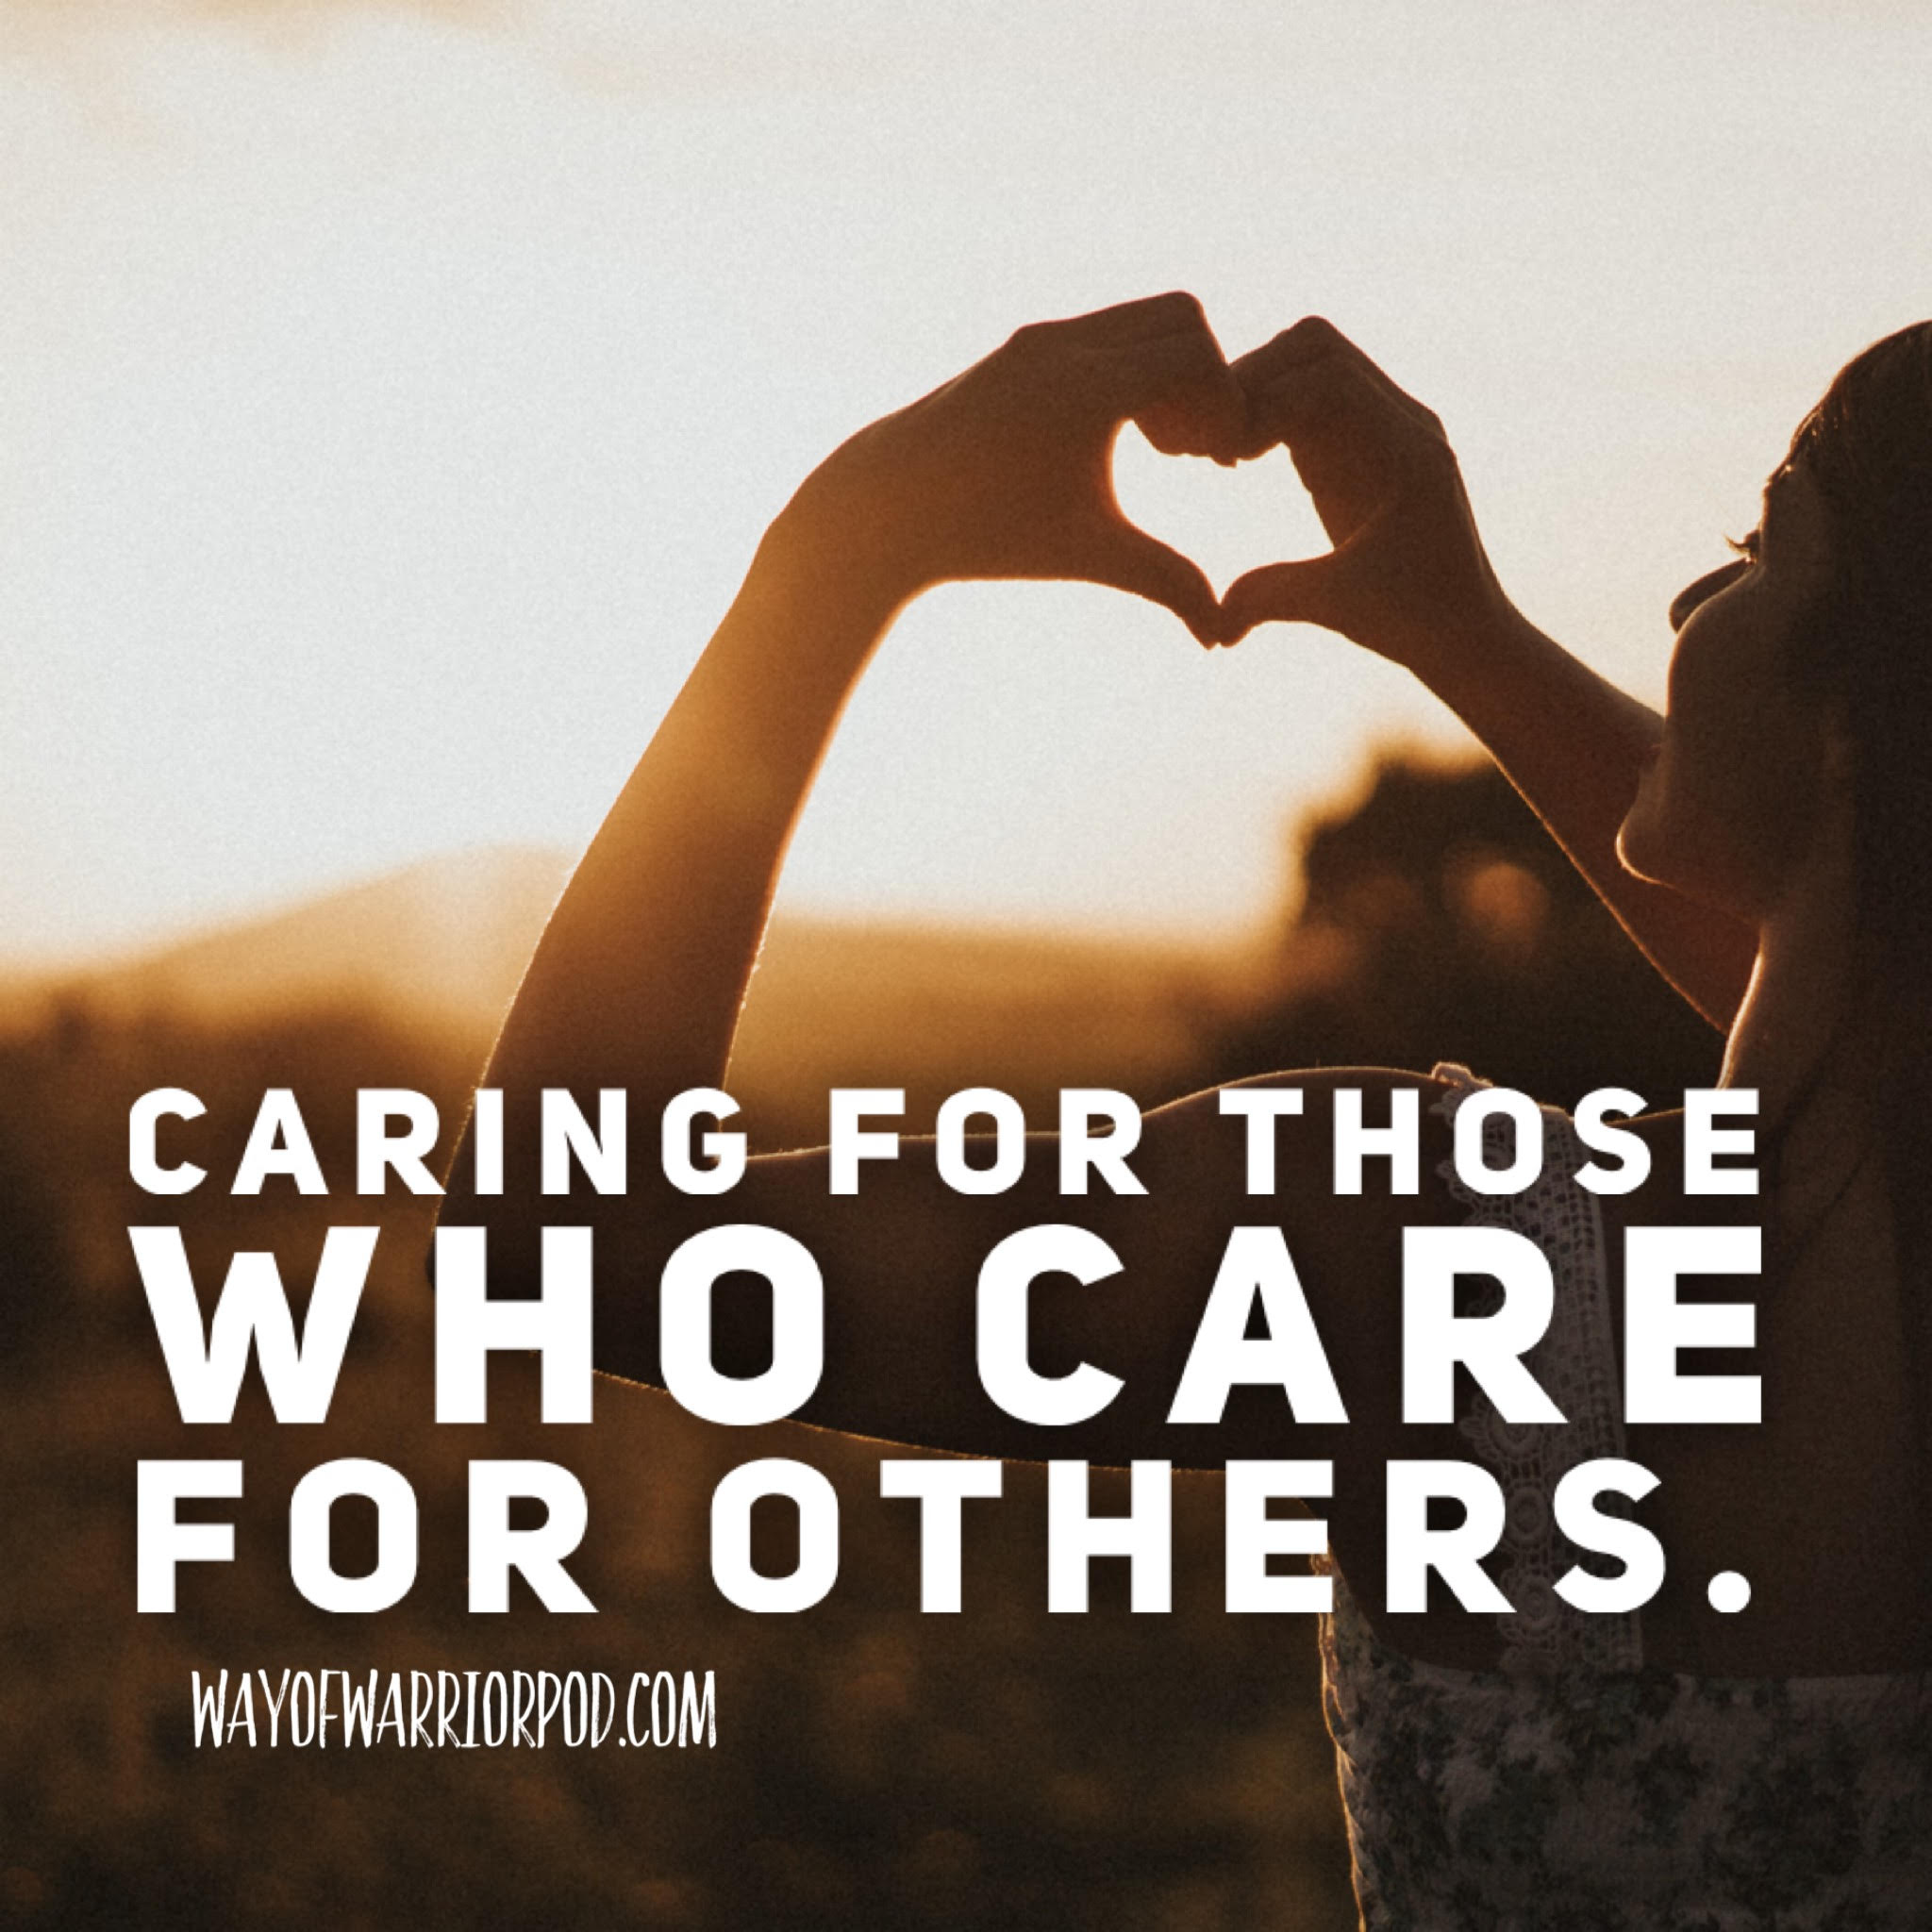 Caring for Those Who Care for Others.